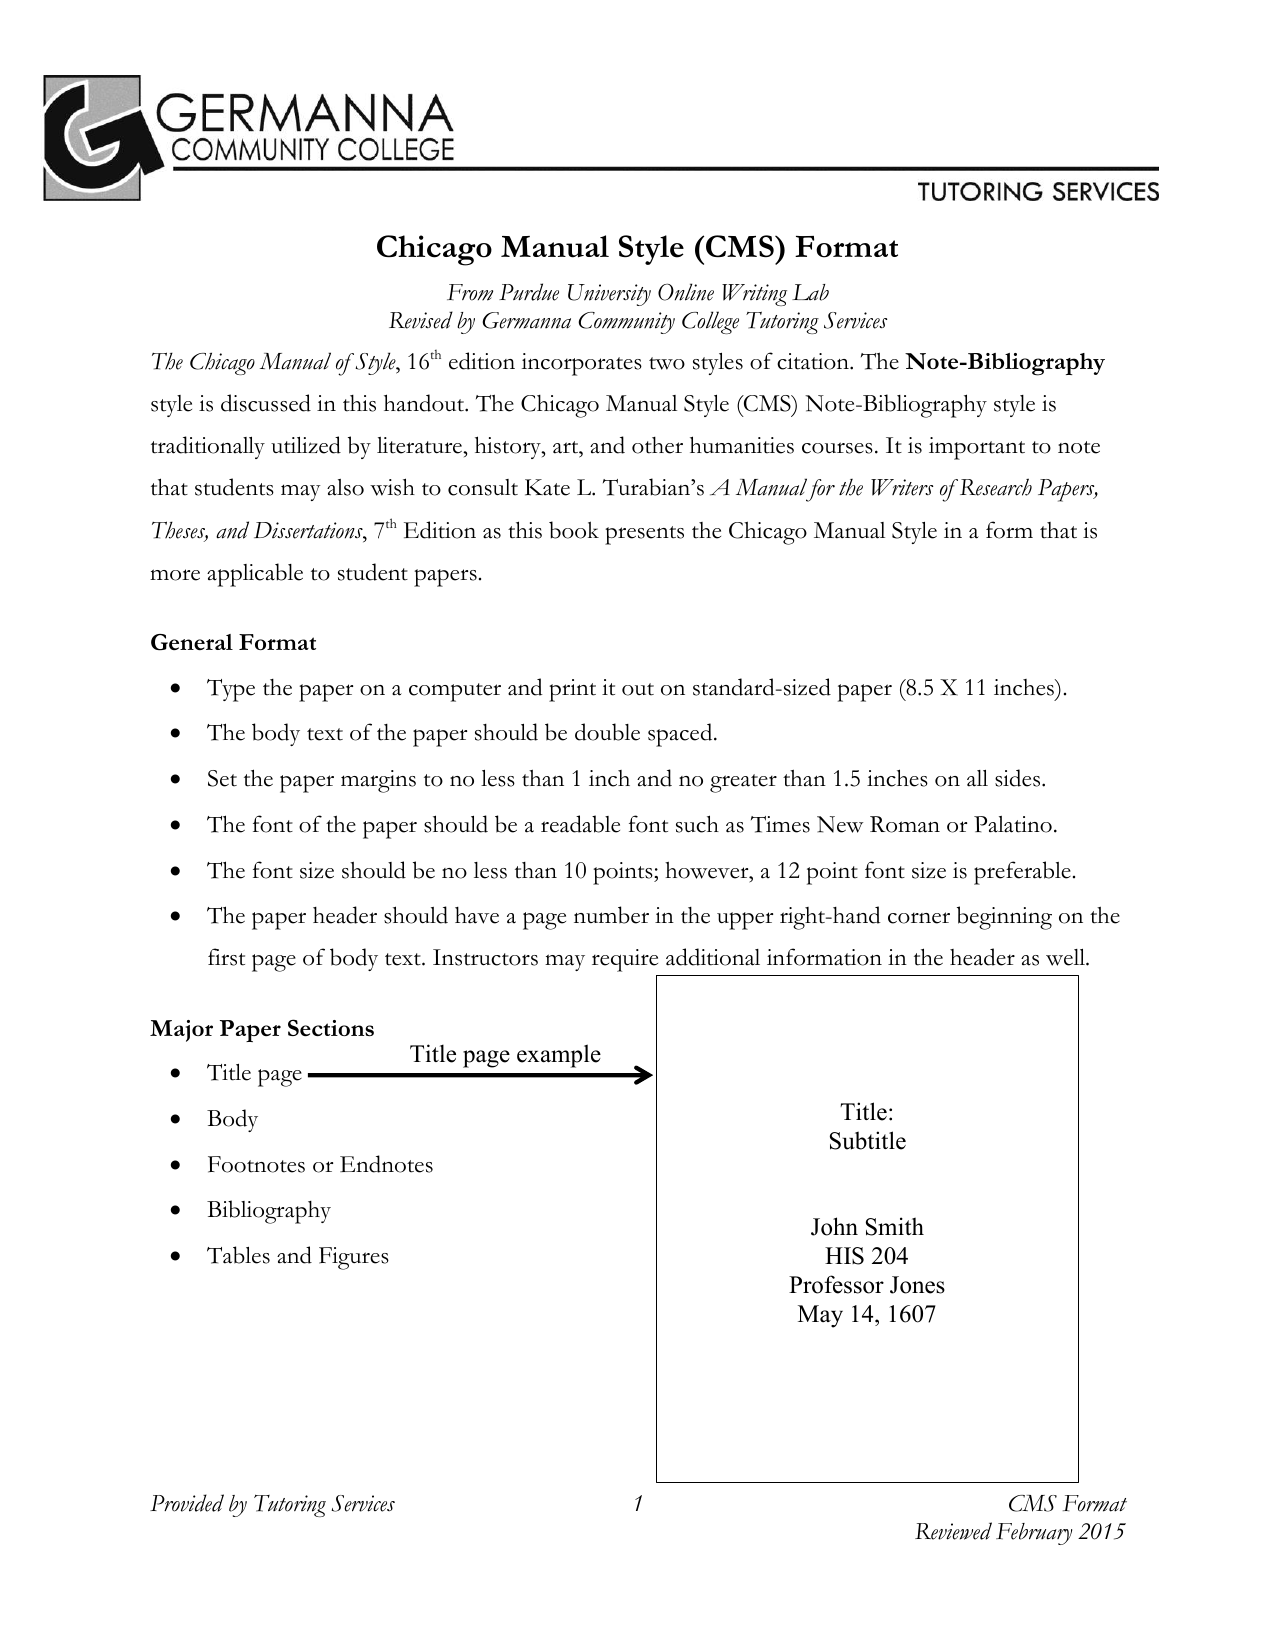 how to write a paper in chicago format